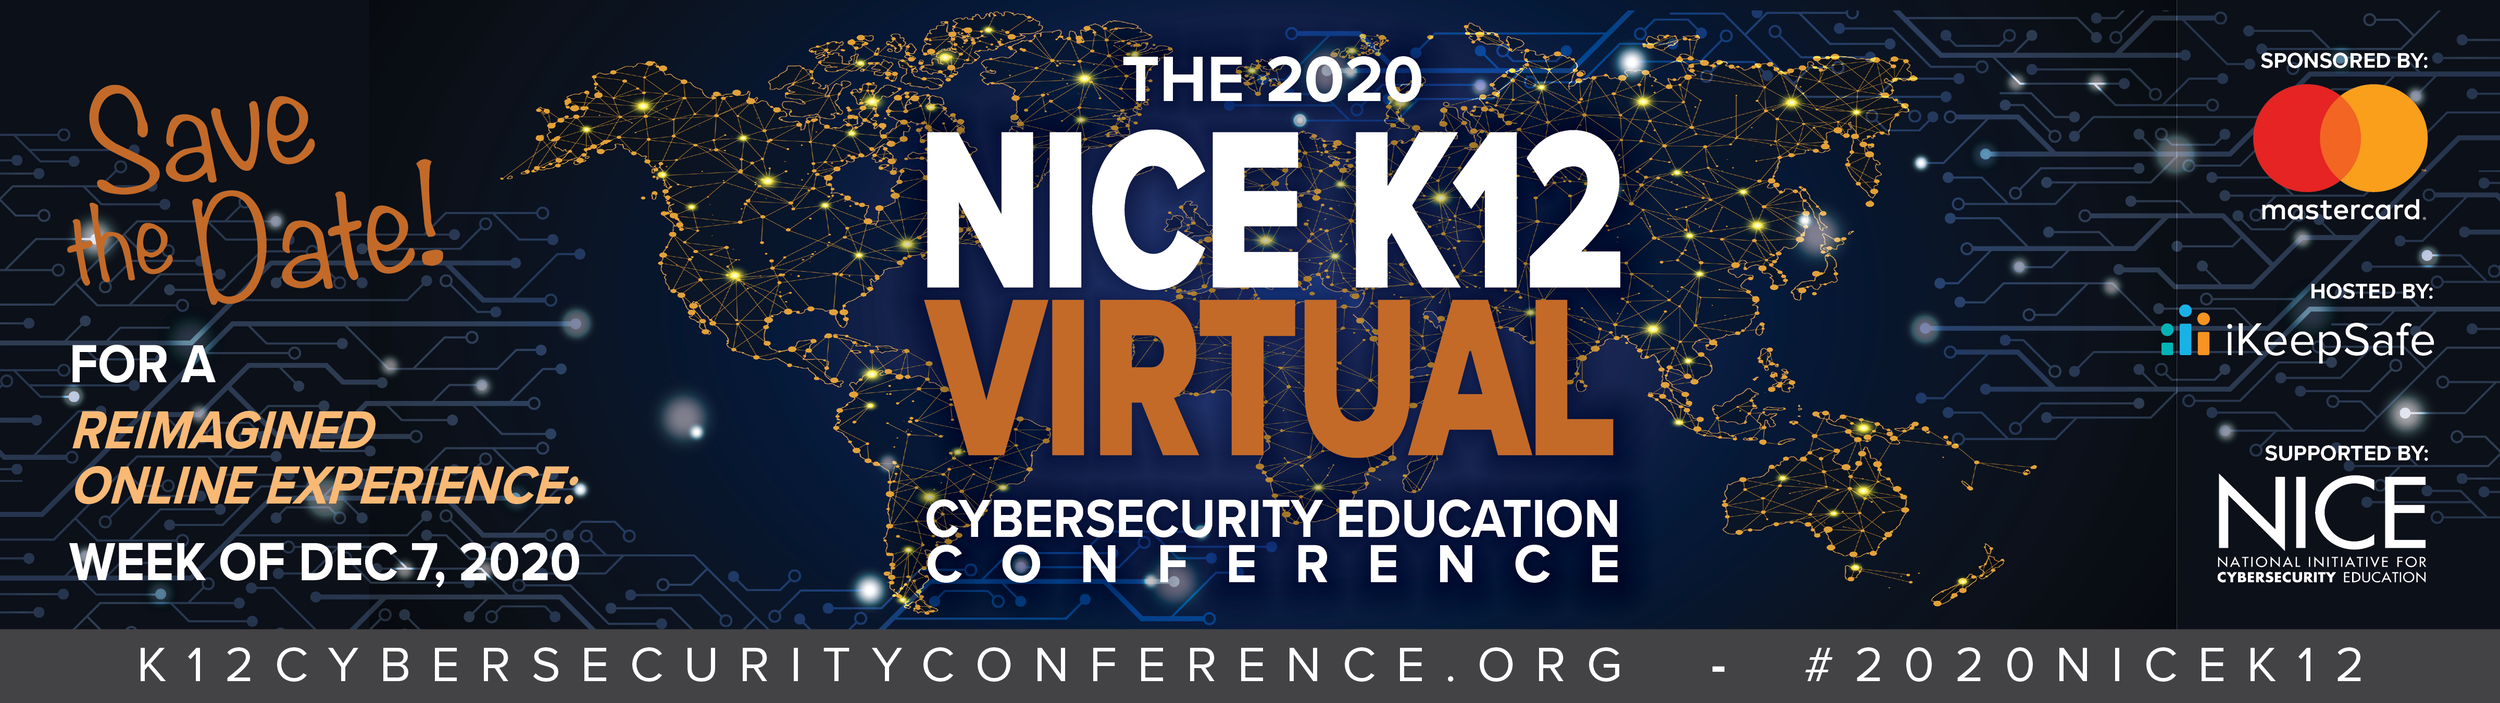 Conference Planning Committee Nice K12 Cybersecurity Education